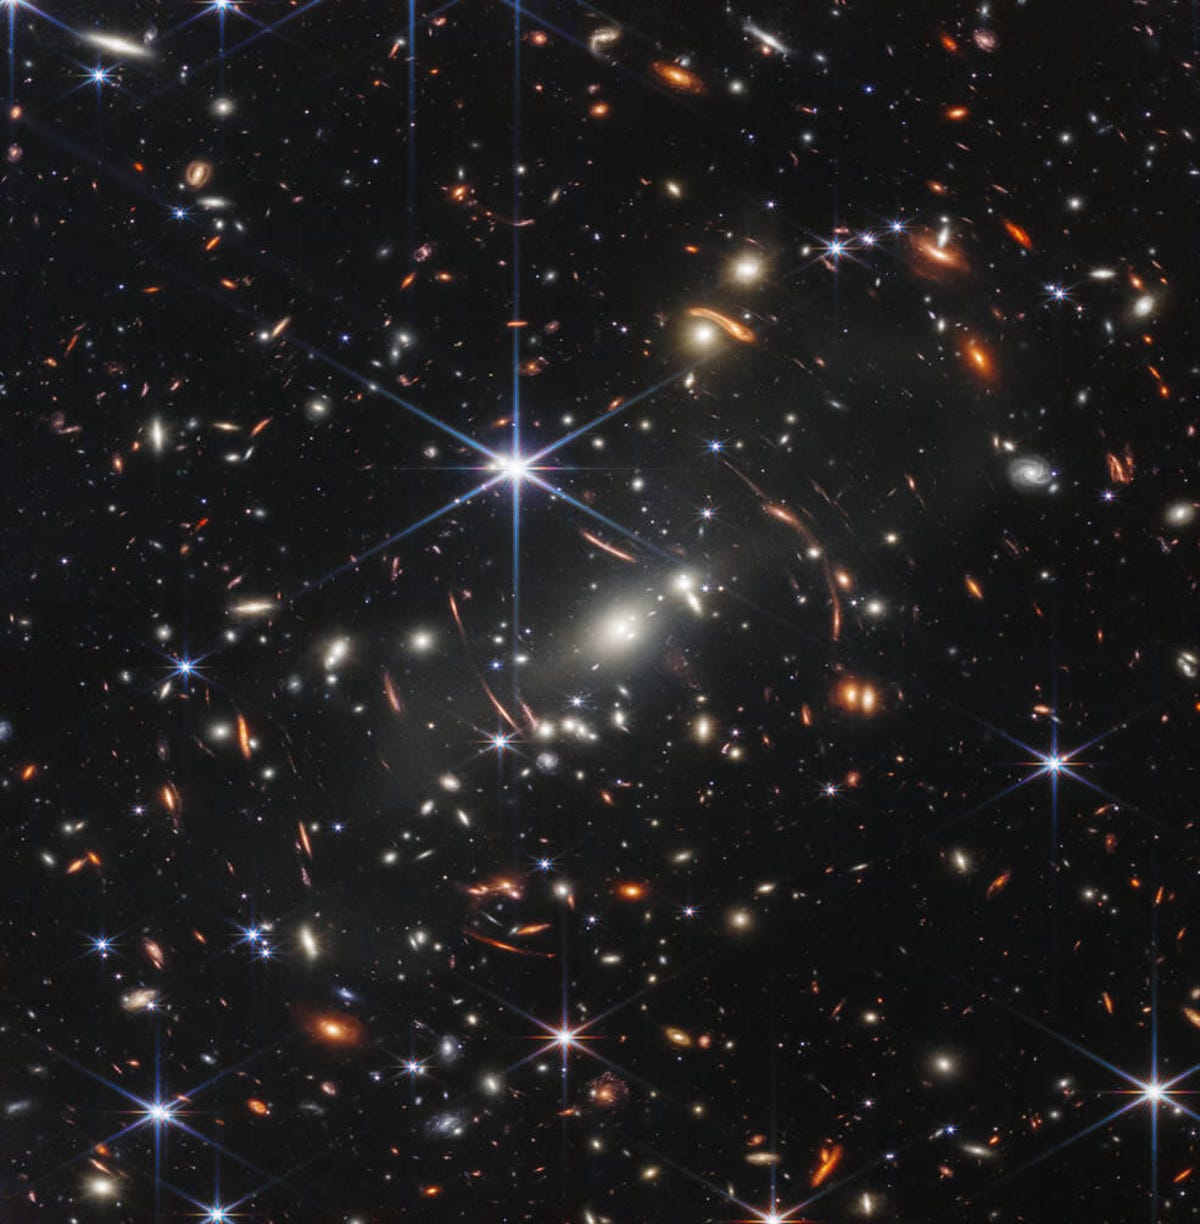 A view of hundreds (maybe thousands) of galaxies in deep space